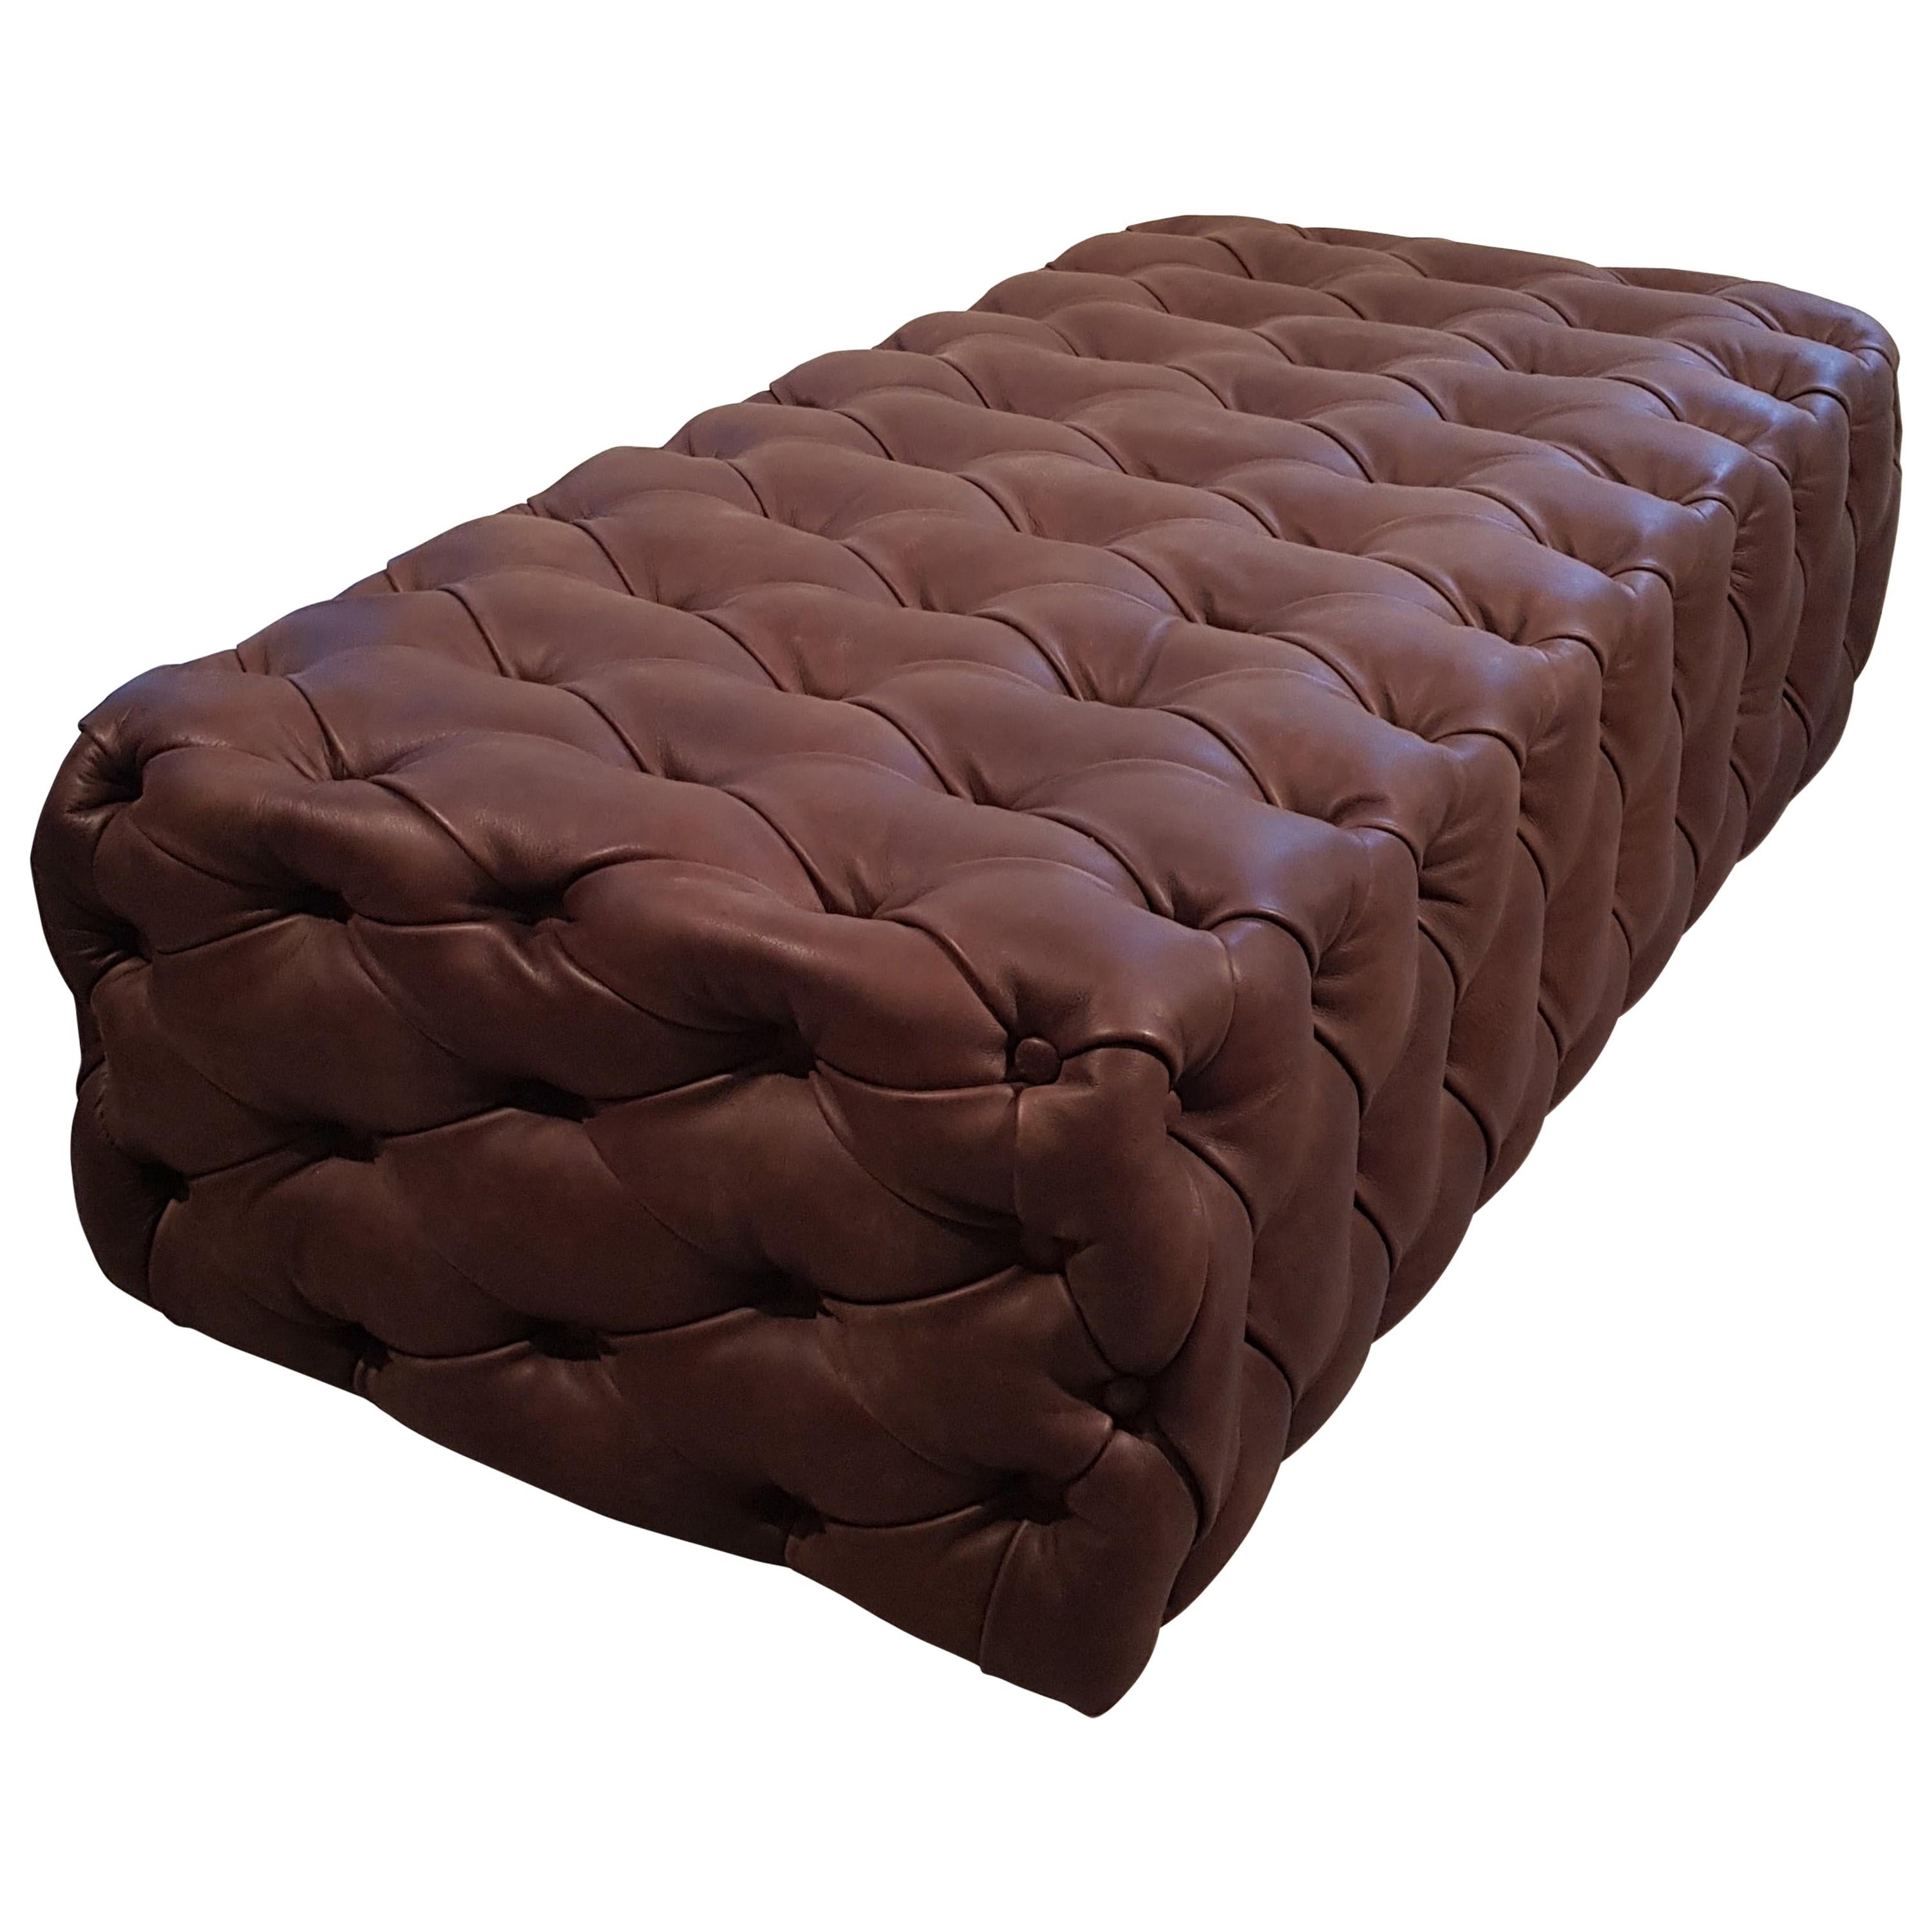 Customizable Brown Leather Capitonné Pouf Available in Other Colors Shape Size